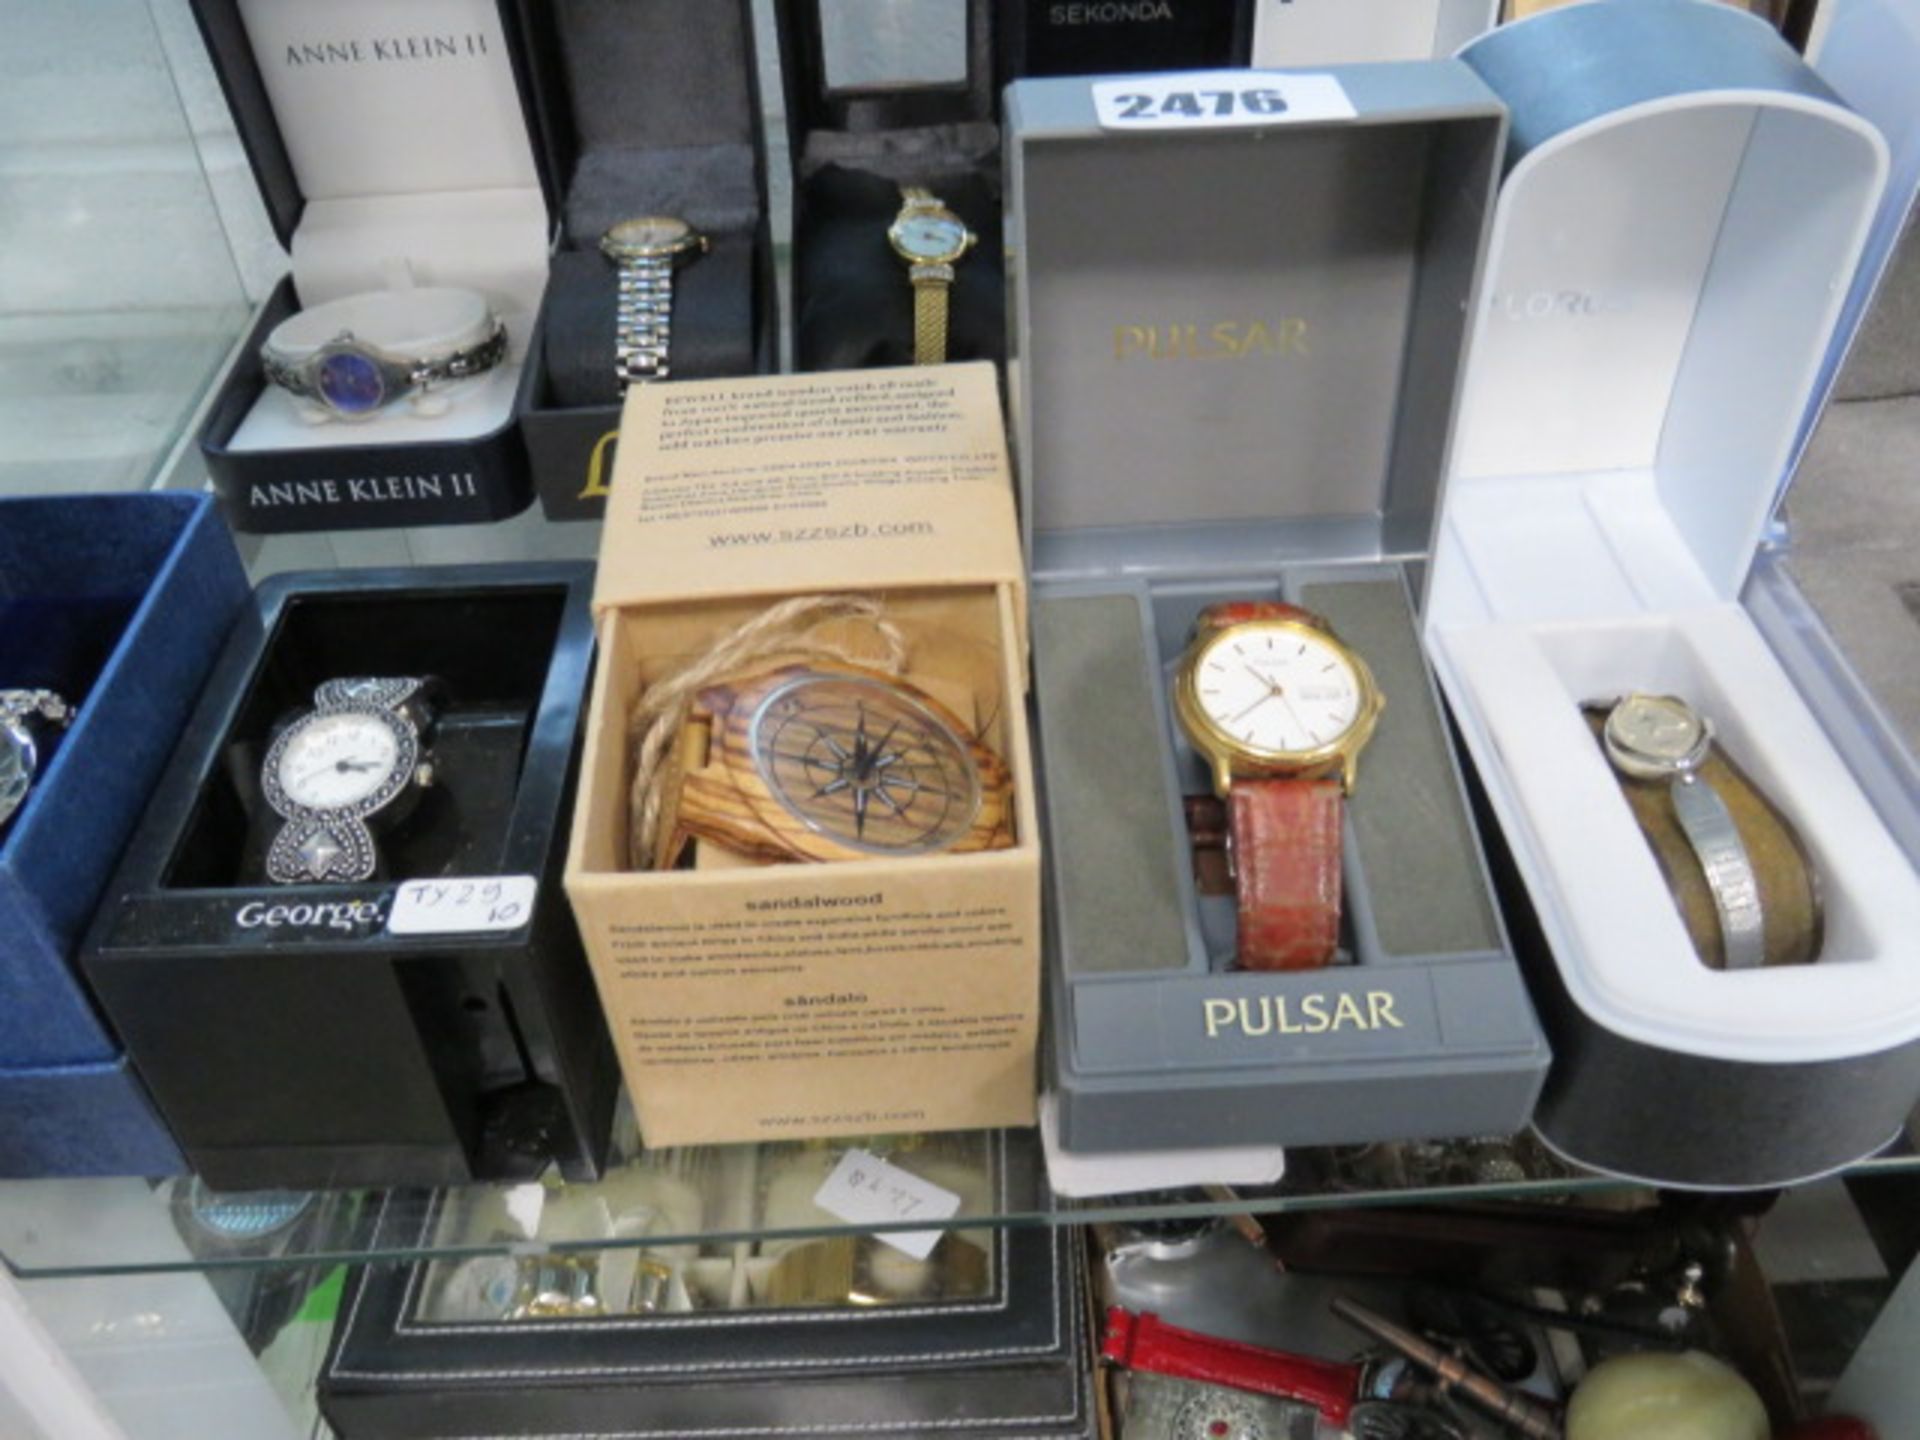 6 various watches with boxes inc. George, Pulsar, DKNY and Lorus